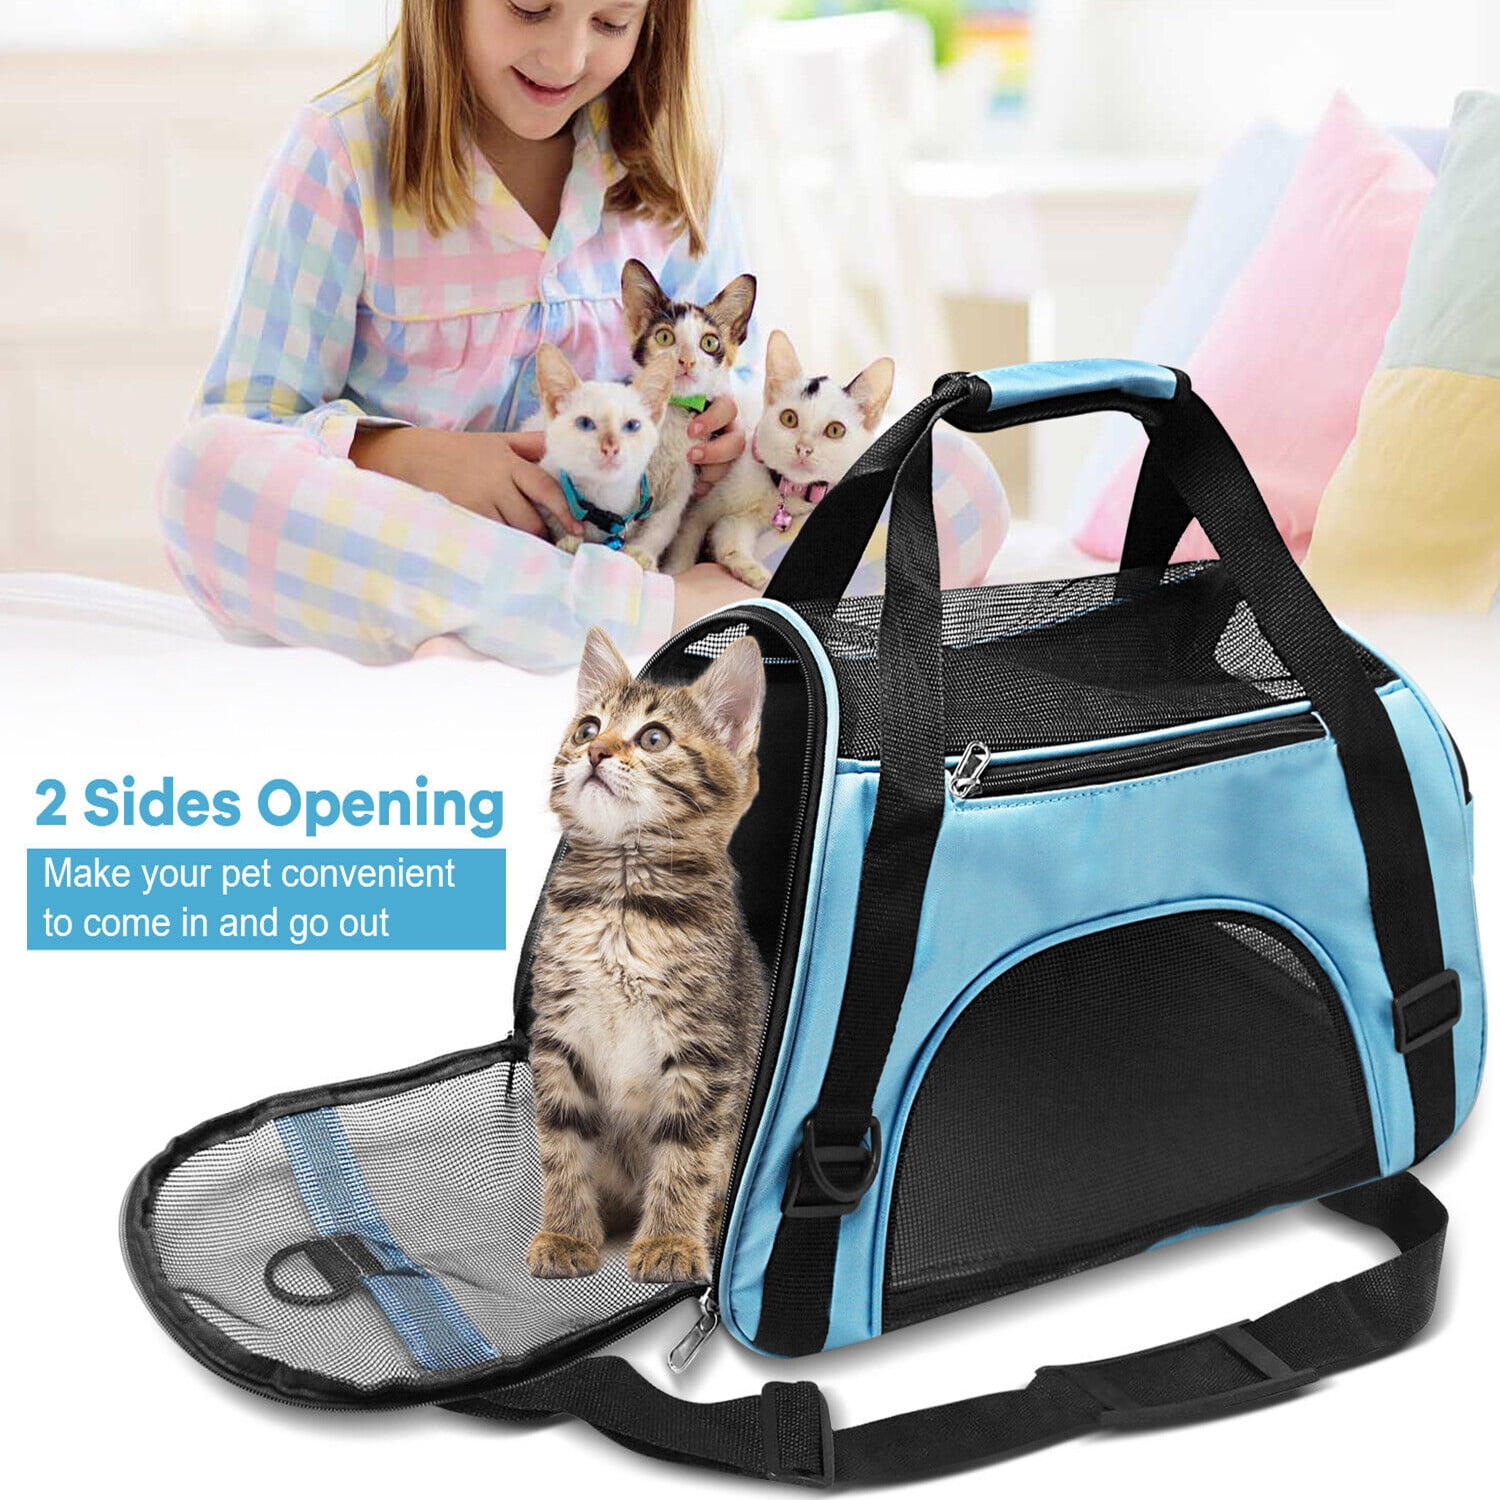 Cat Carrier, Pet Carrier for Large Cats 15.5bs, Dog Carrier for Small Dogs,  Collapsible Cat Bag Carrier for Travel & Car, Black 